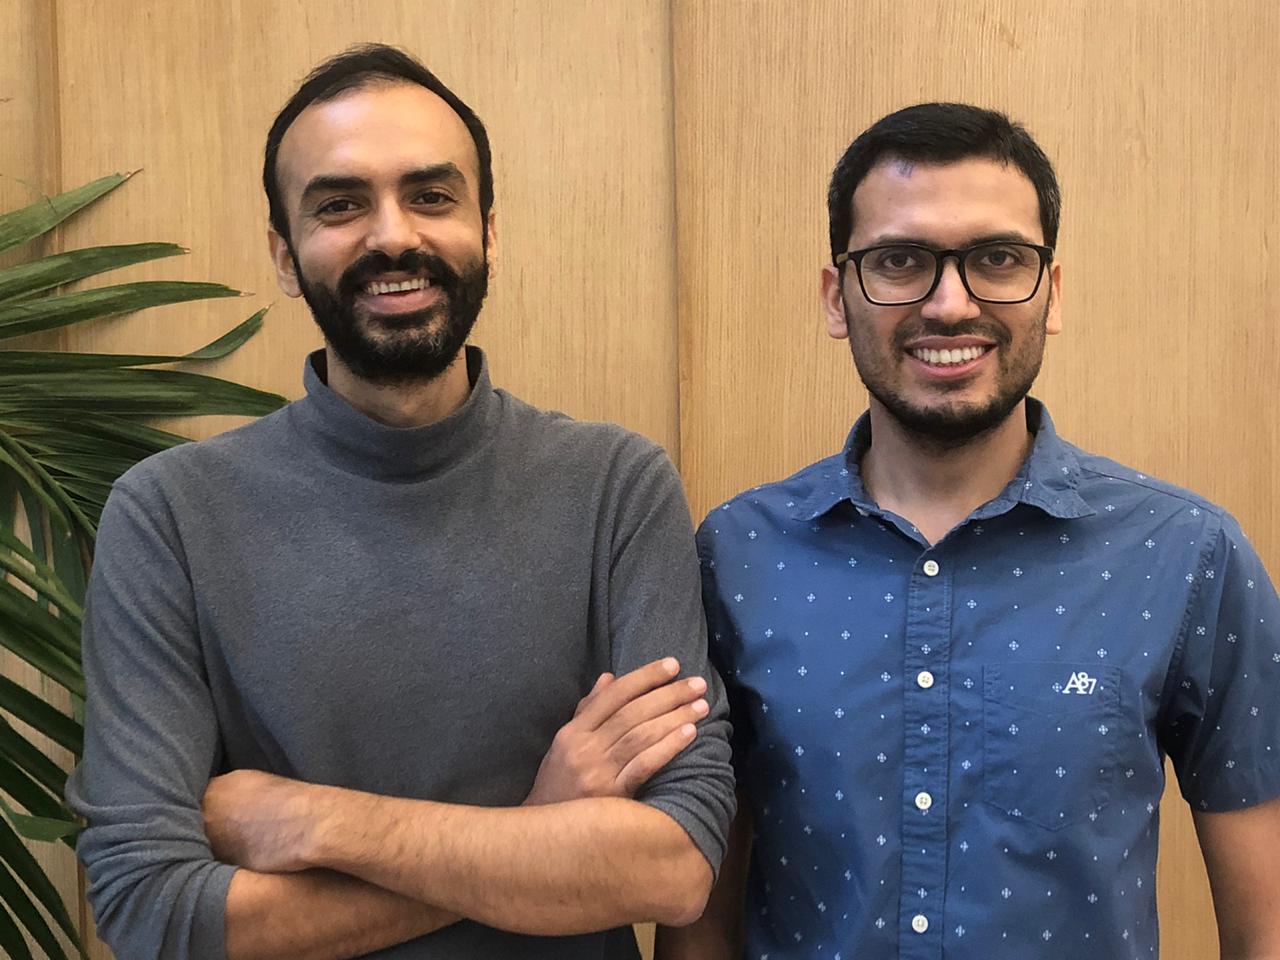 Plum, an India-based group health insurance startup, announced that it has raised US$15.6 million in series A funding led by Tiger Global. Existing in